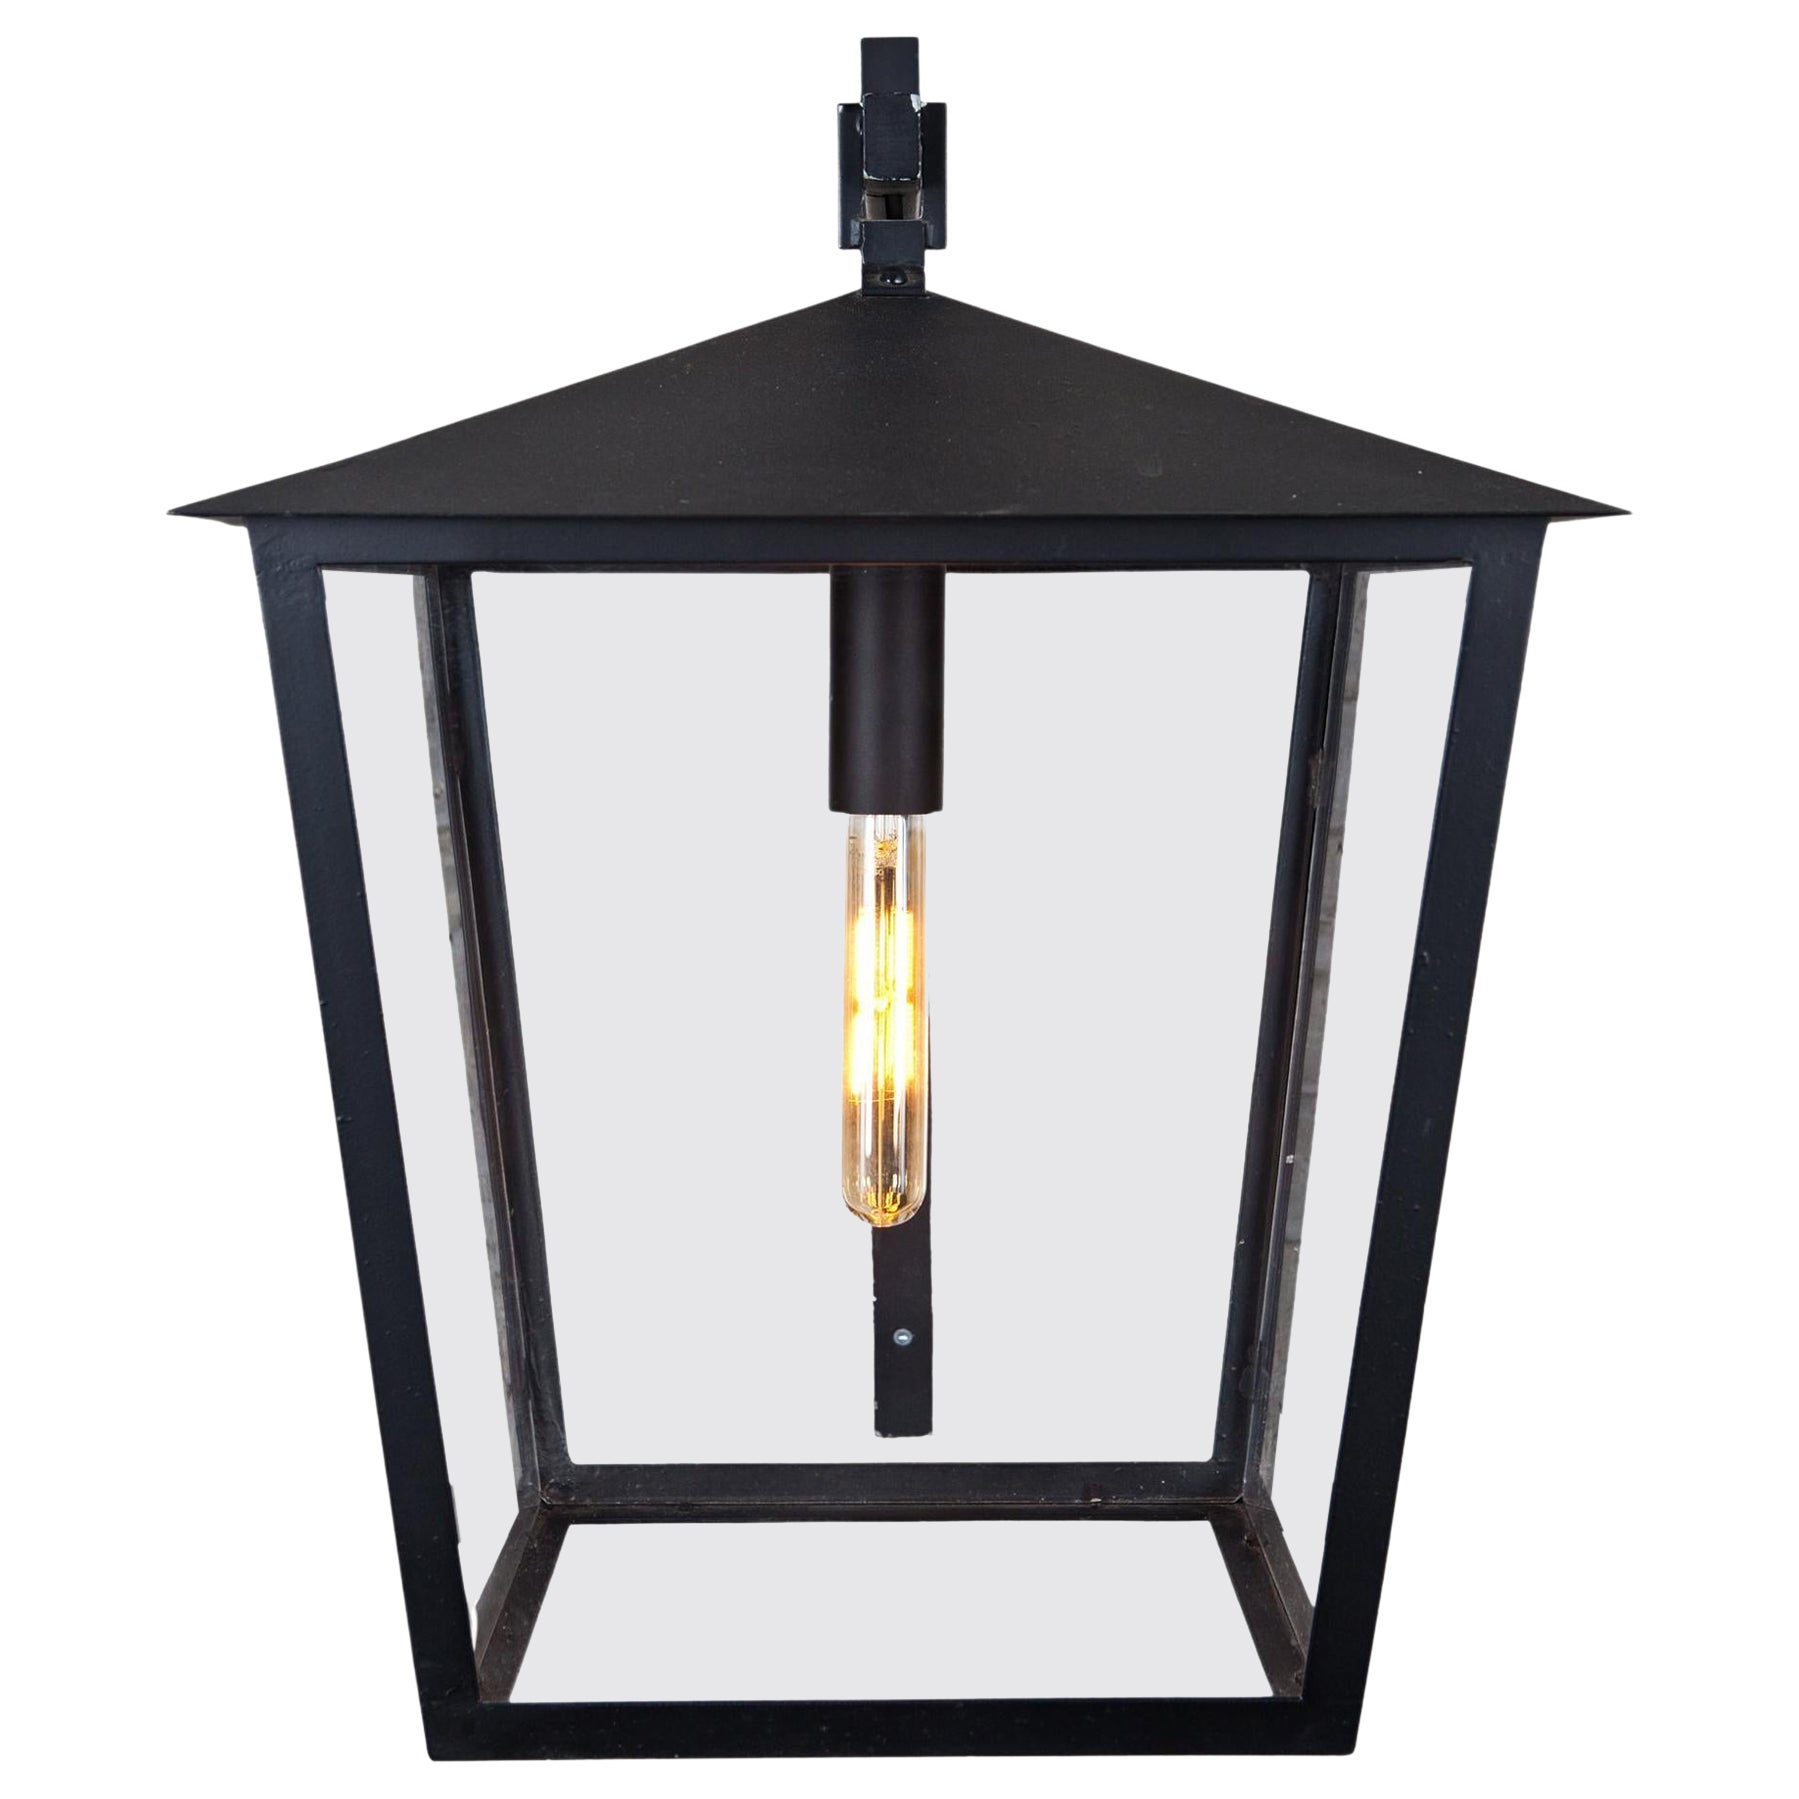 Outer Lantern, Steel, Black, Created by Atelier Boucquet